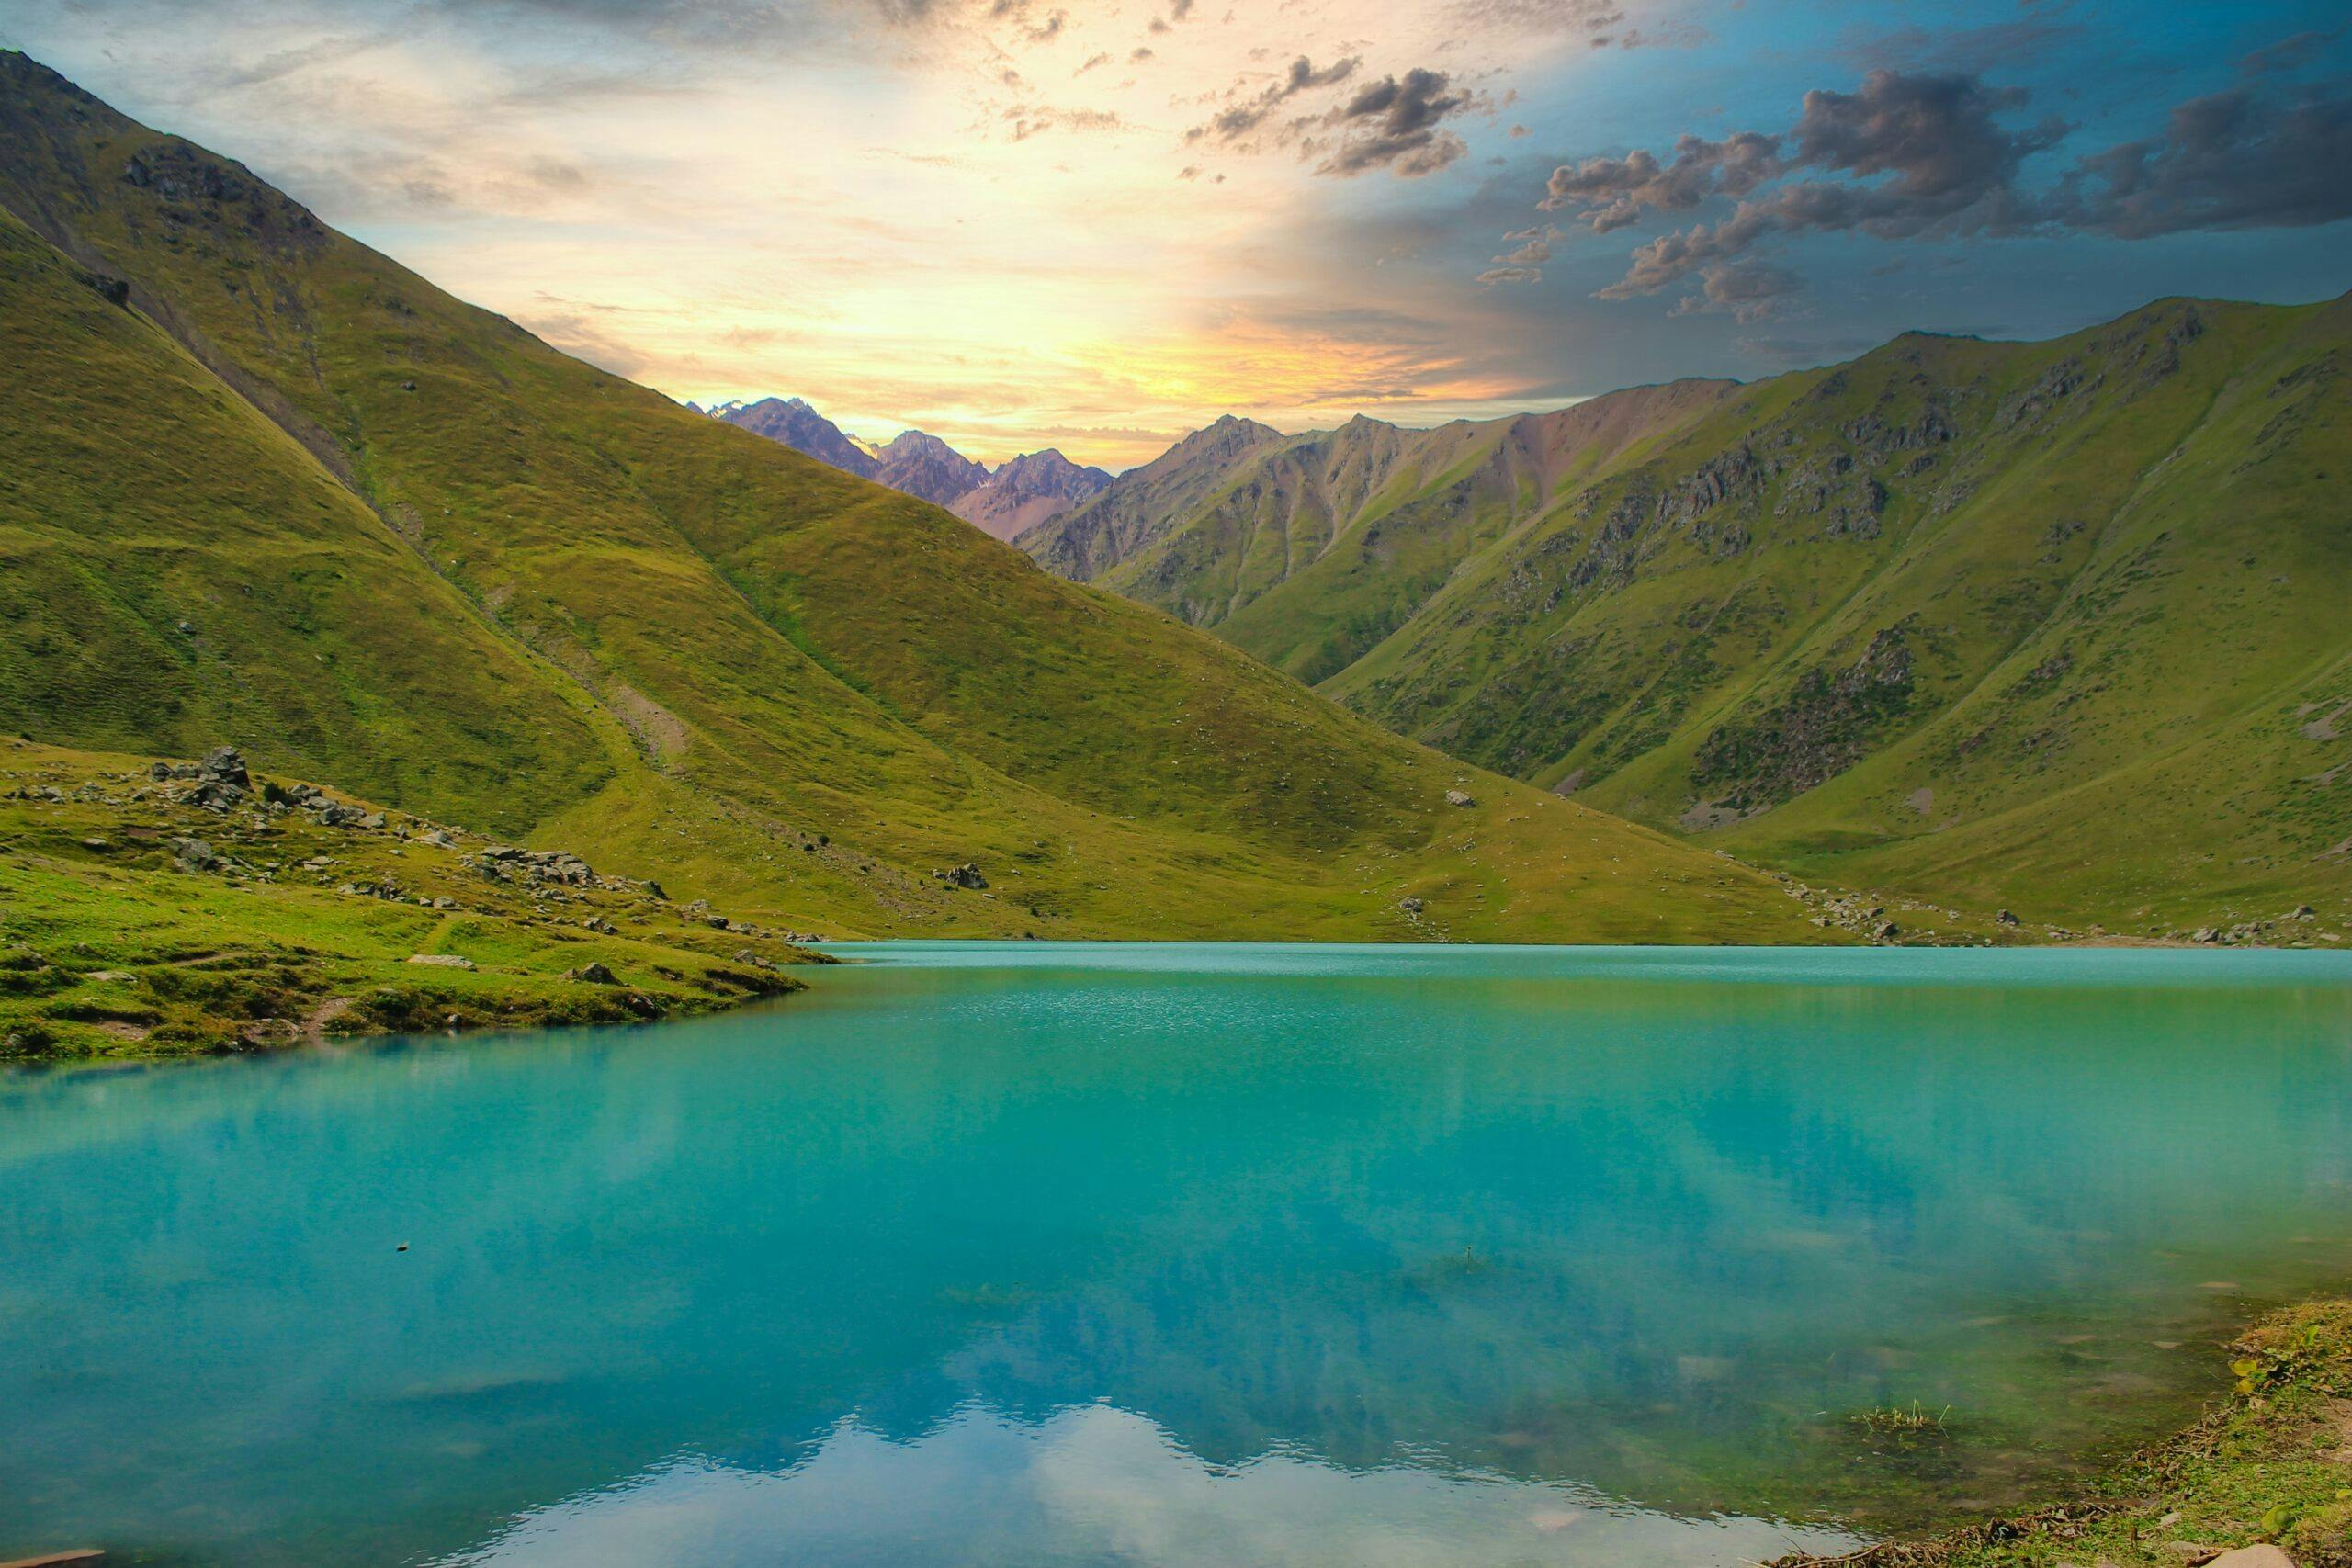 We're reimagining a fairer way to visit Kyrgyzstan